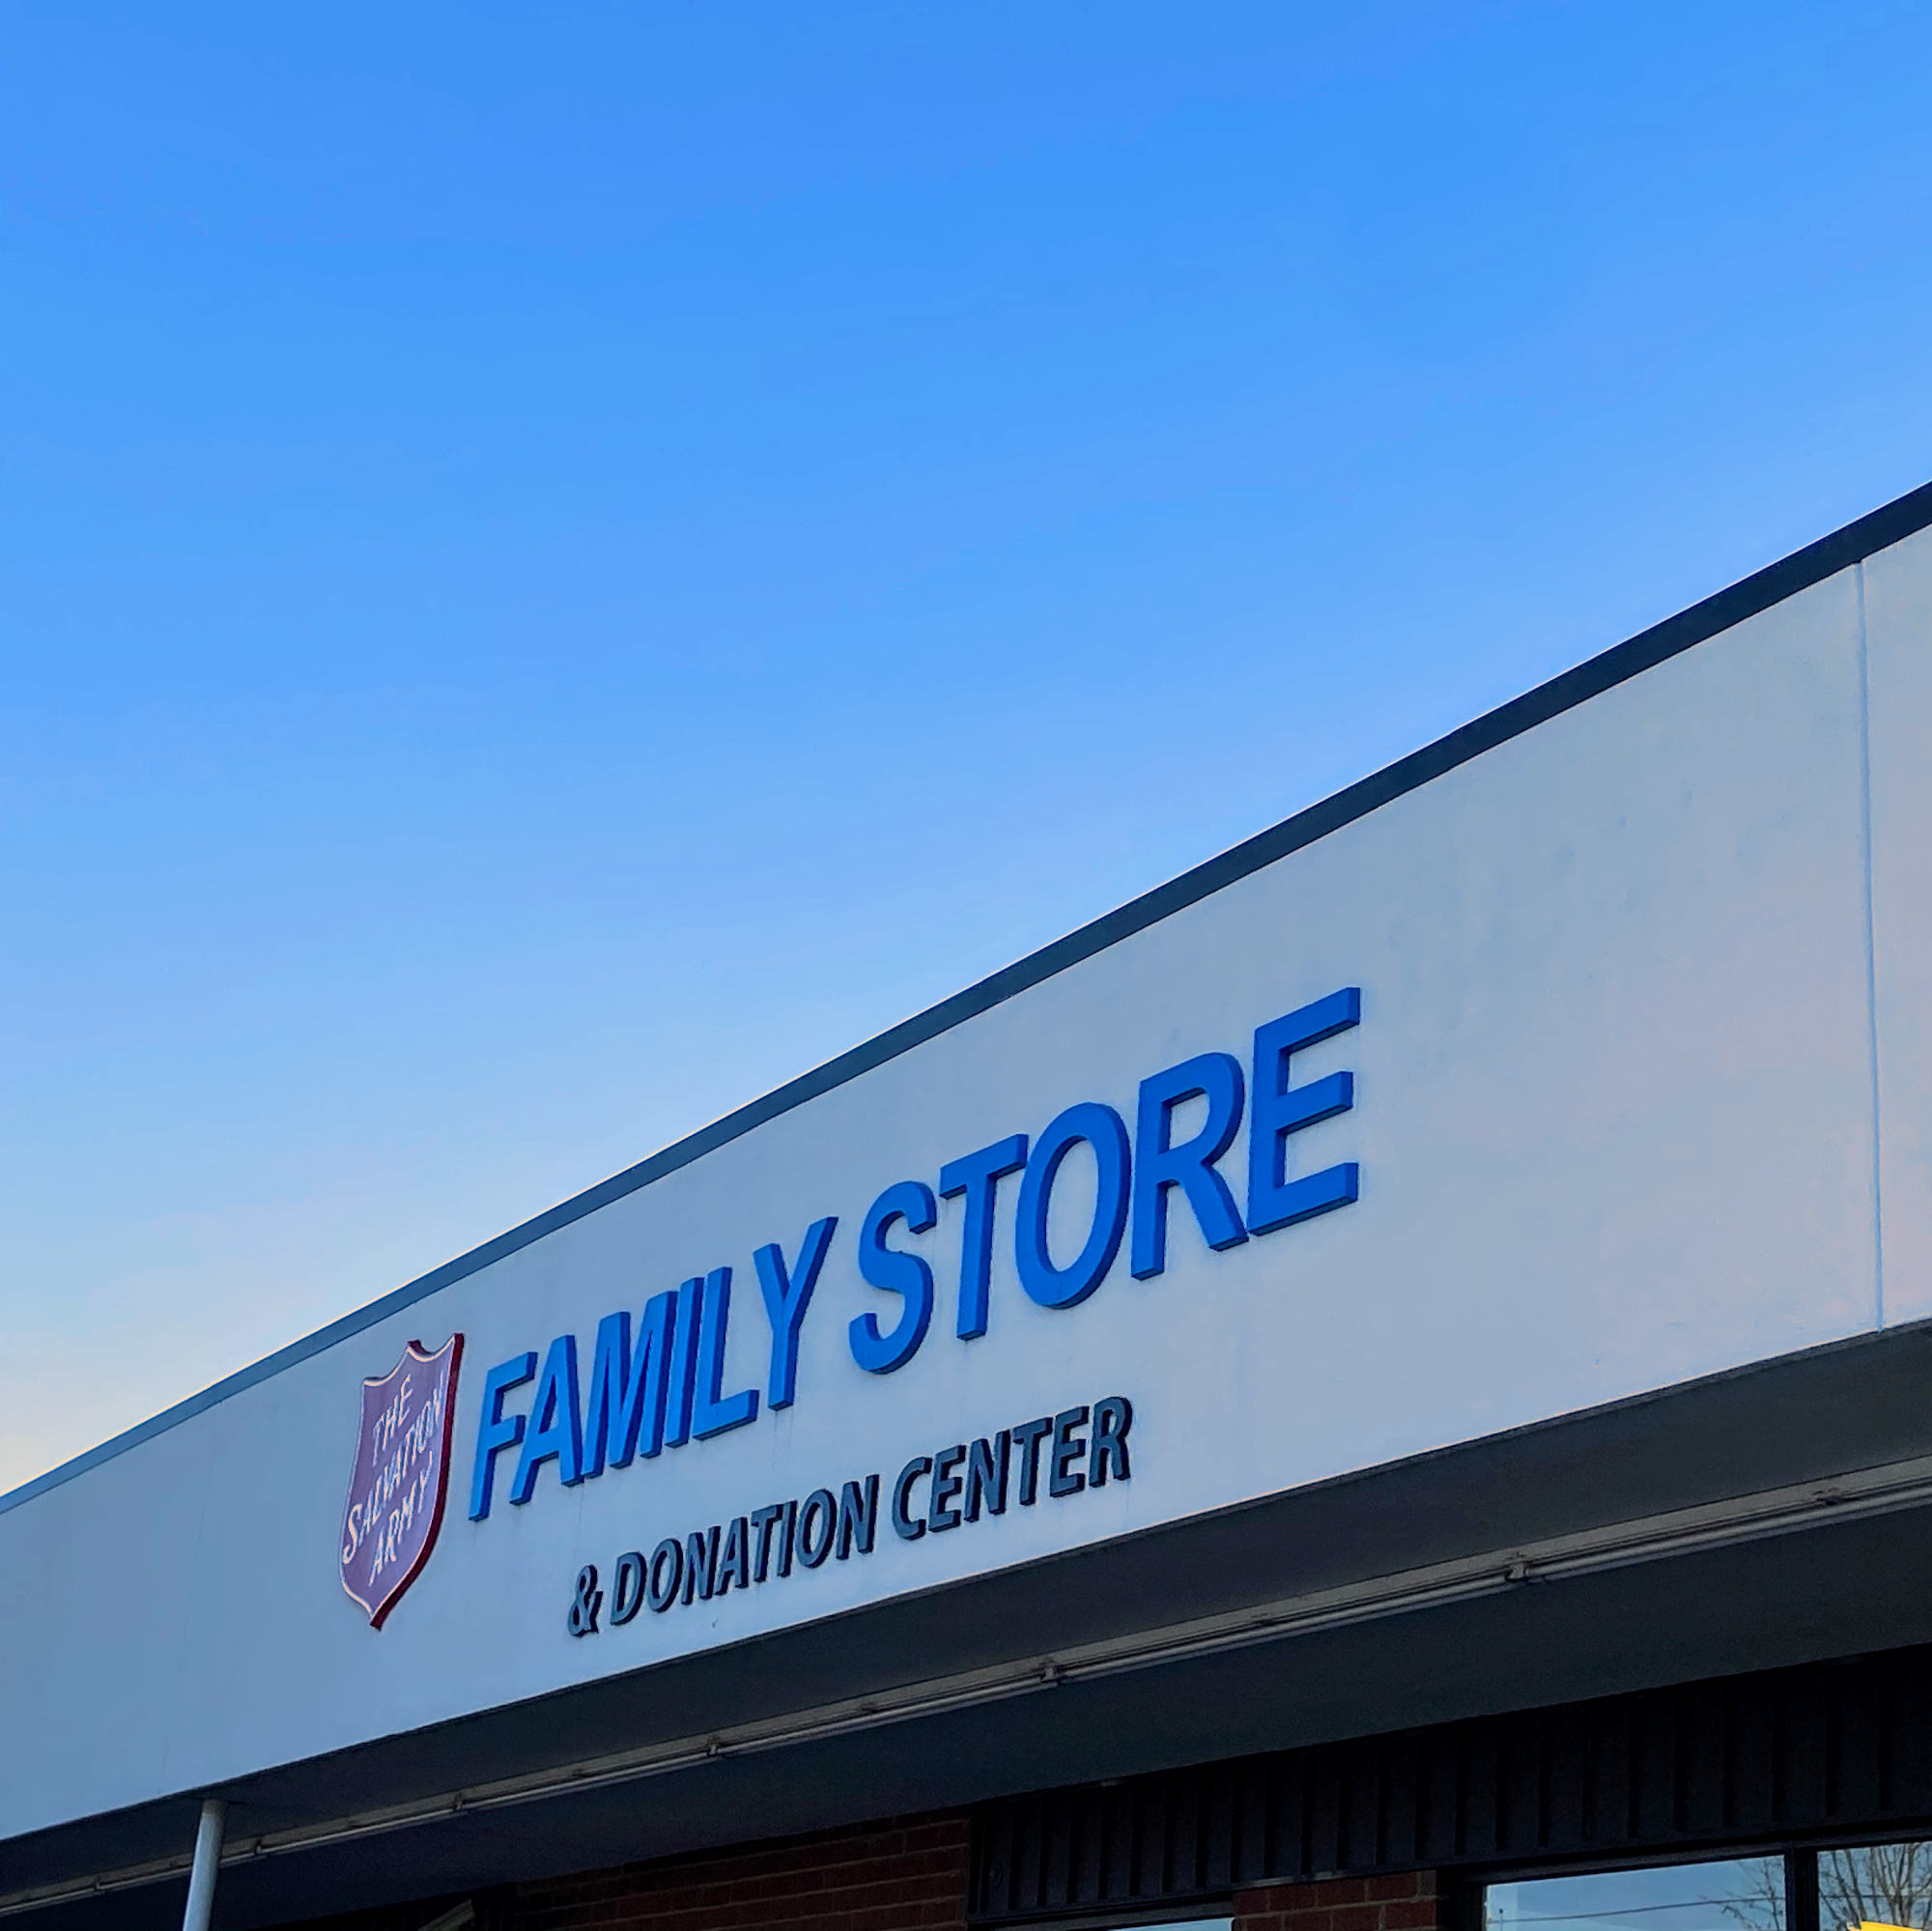 The Salvation Army Asheboro Family Store and Donation Center